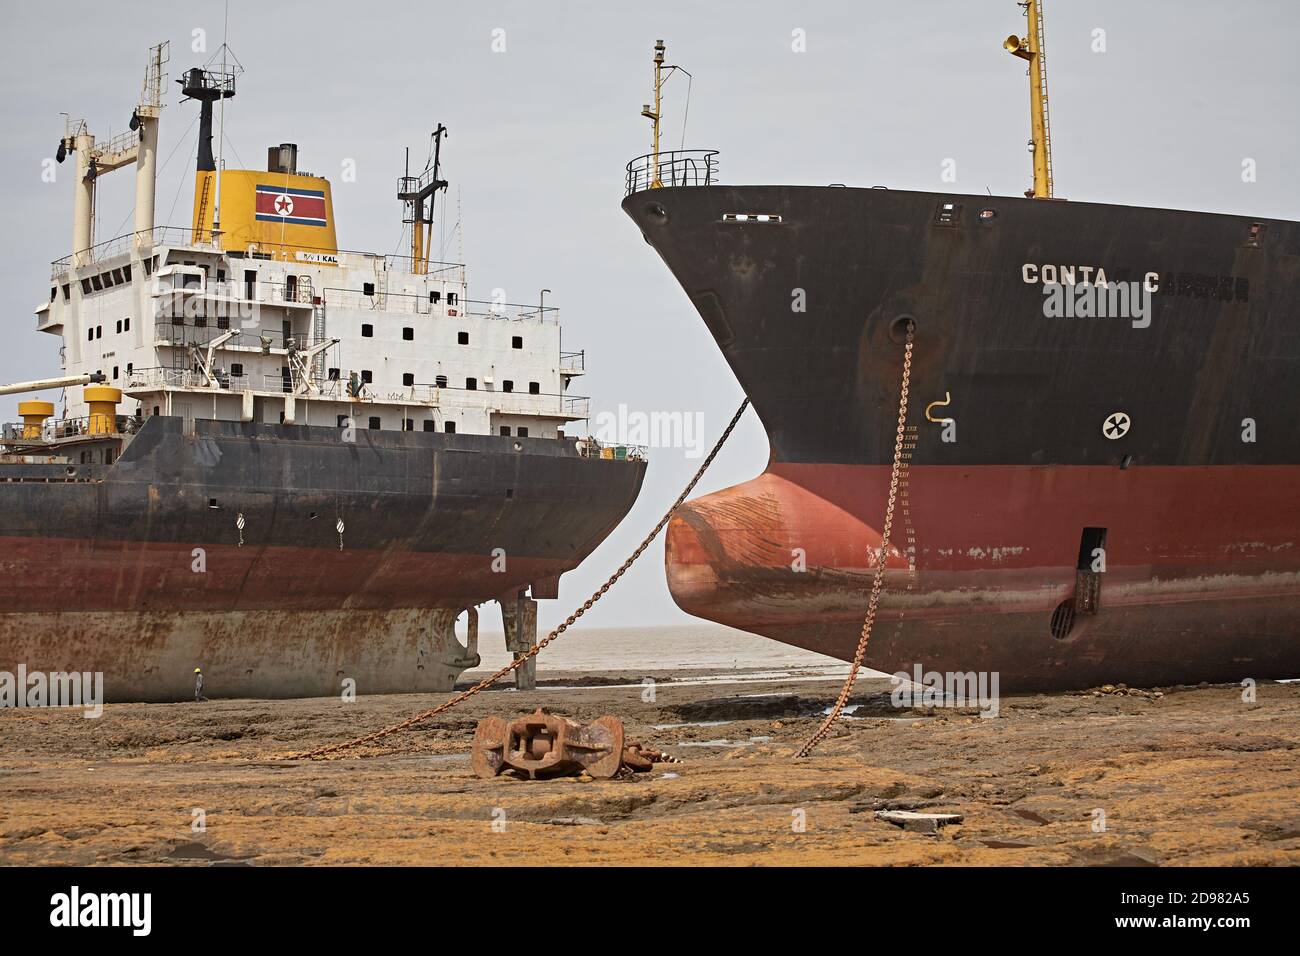 Alang, India, September 2008. Large tonnage cargo ships stranded on the beach waiting to be scrapped. Stock Photo